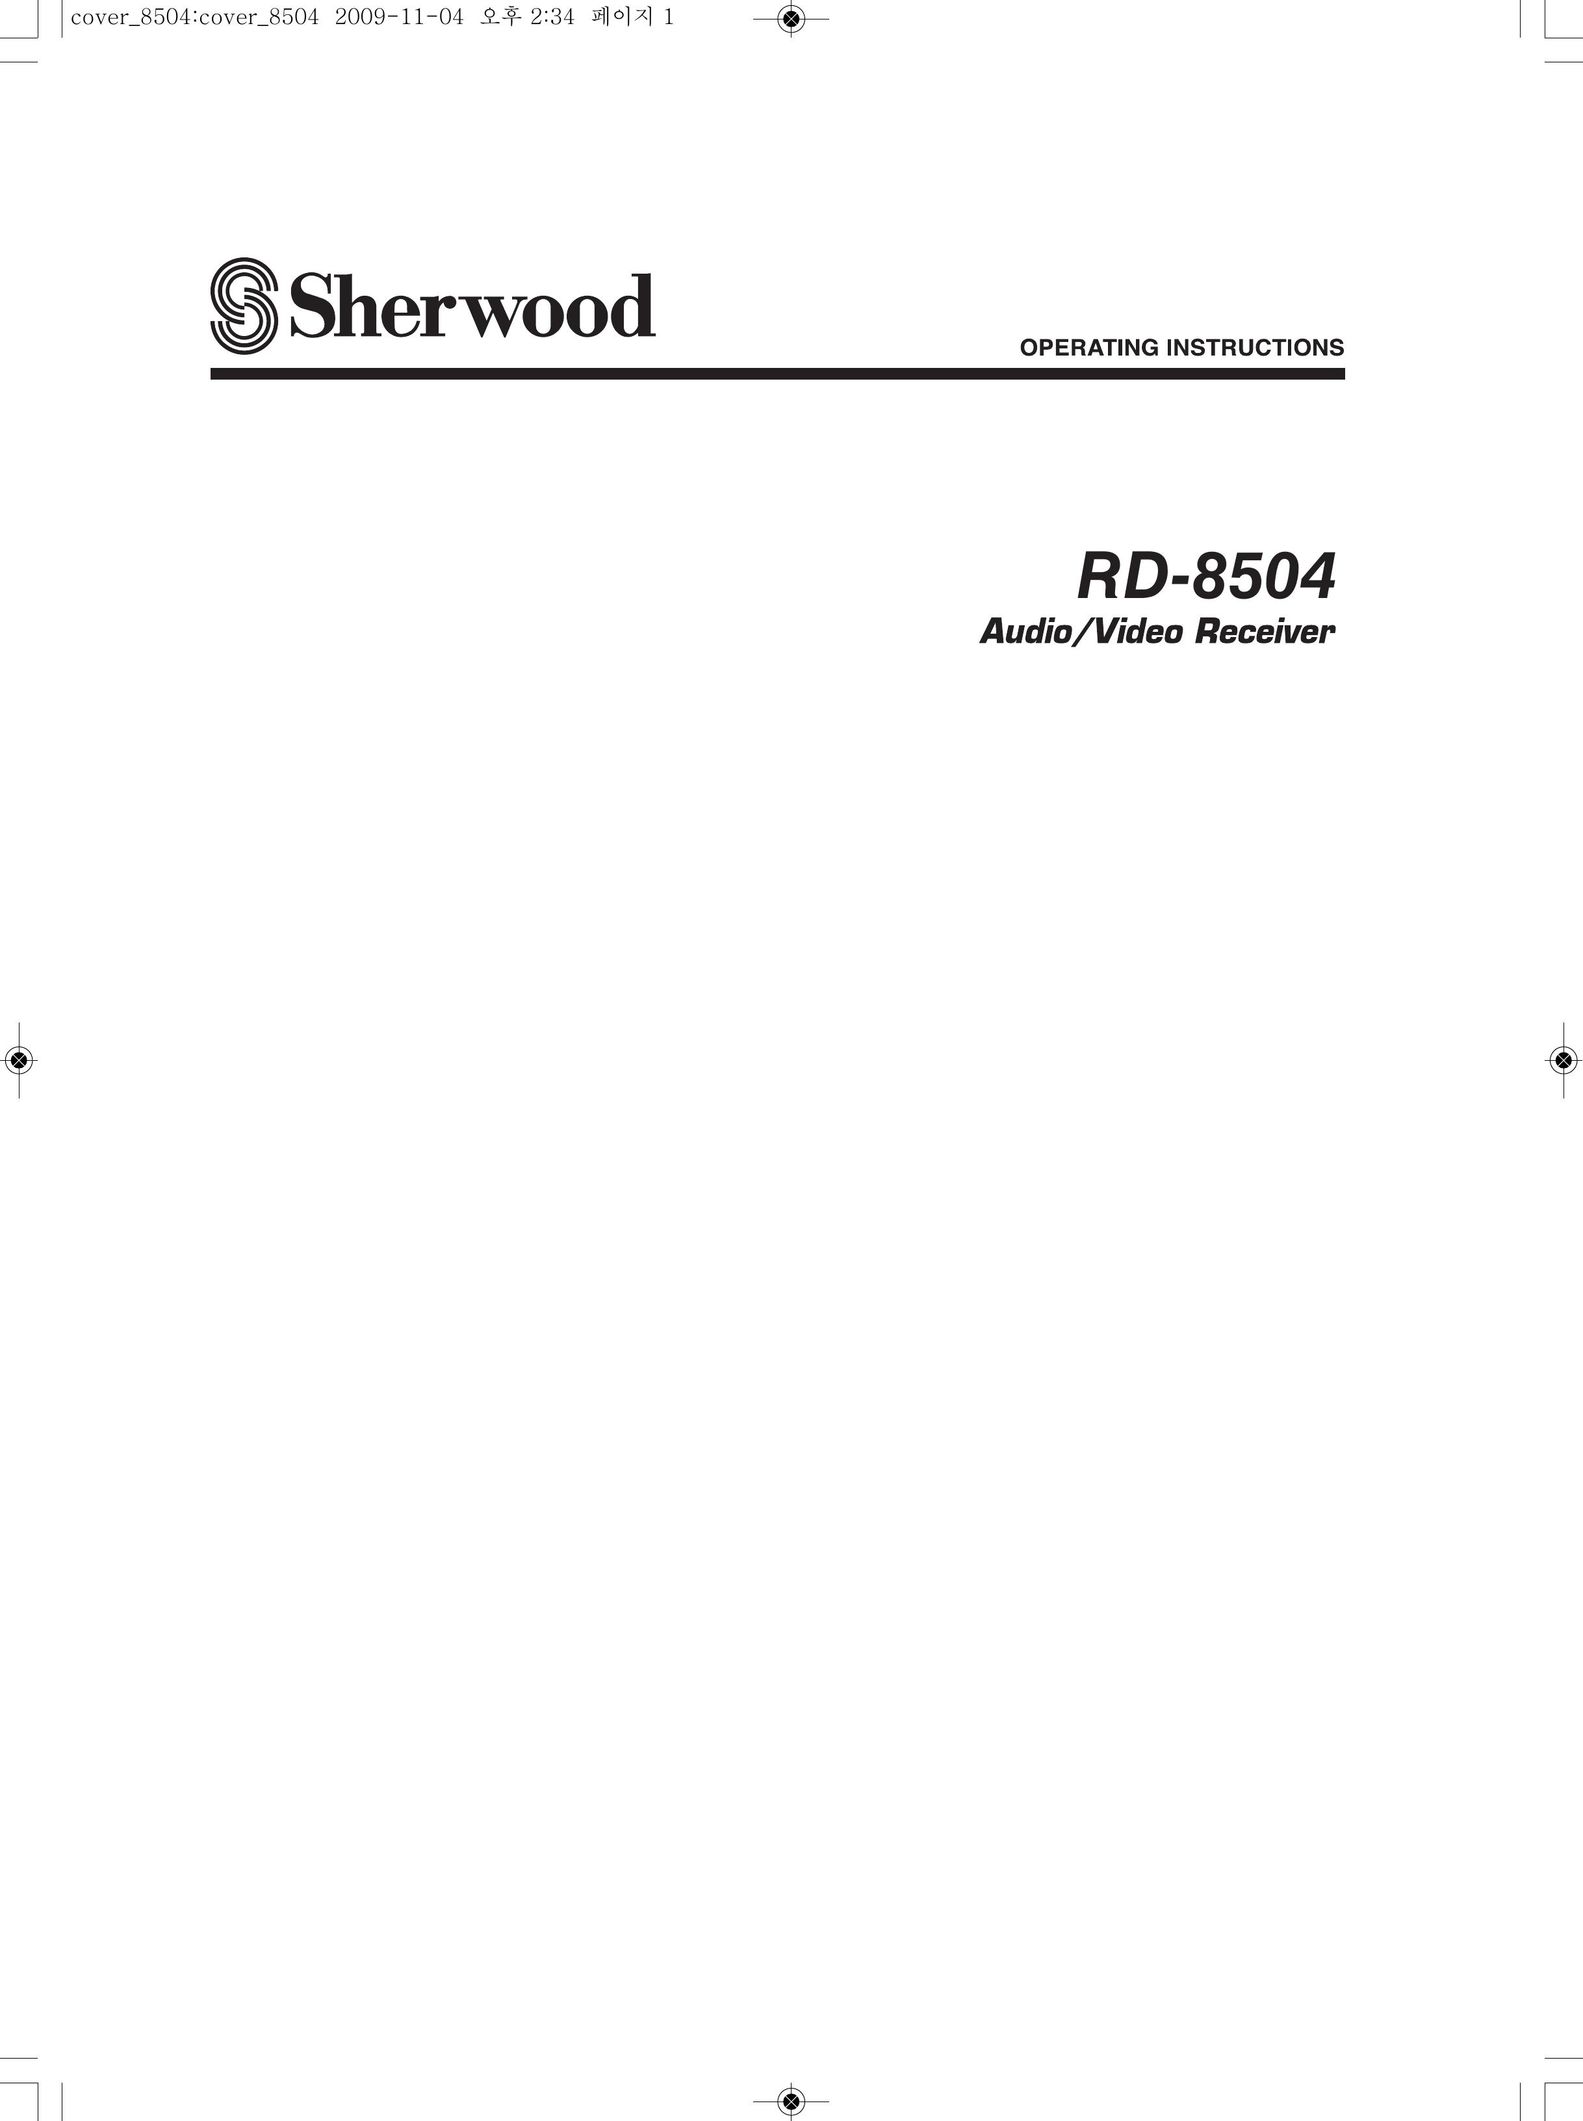 Sherwood RD-8504 Stereo Receiver User Manual